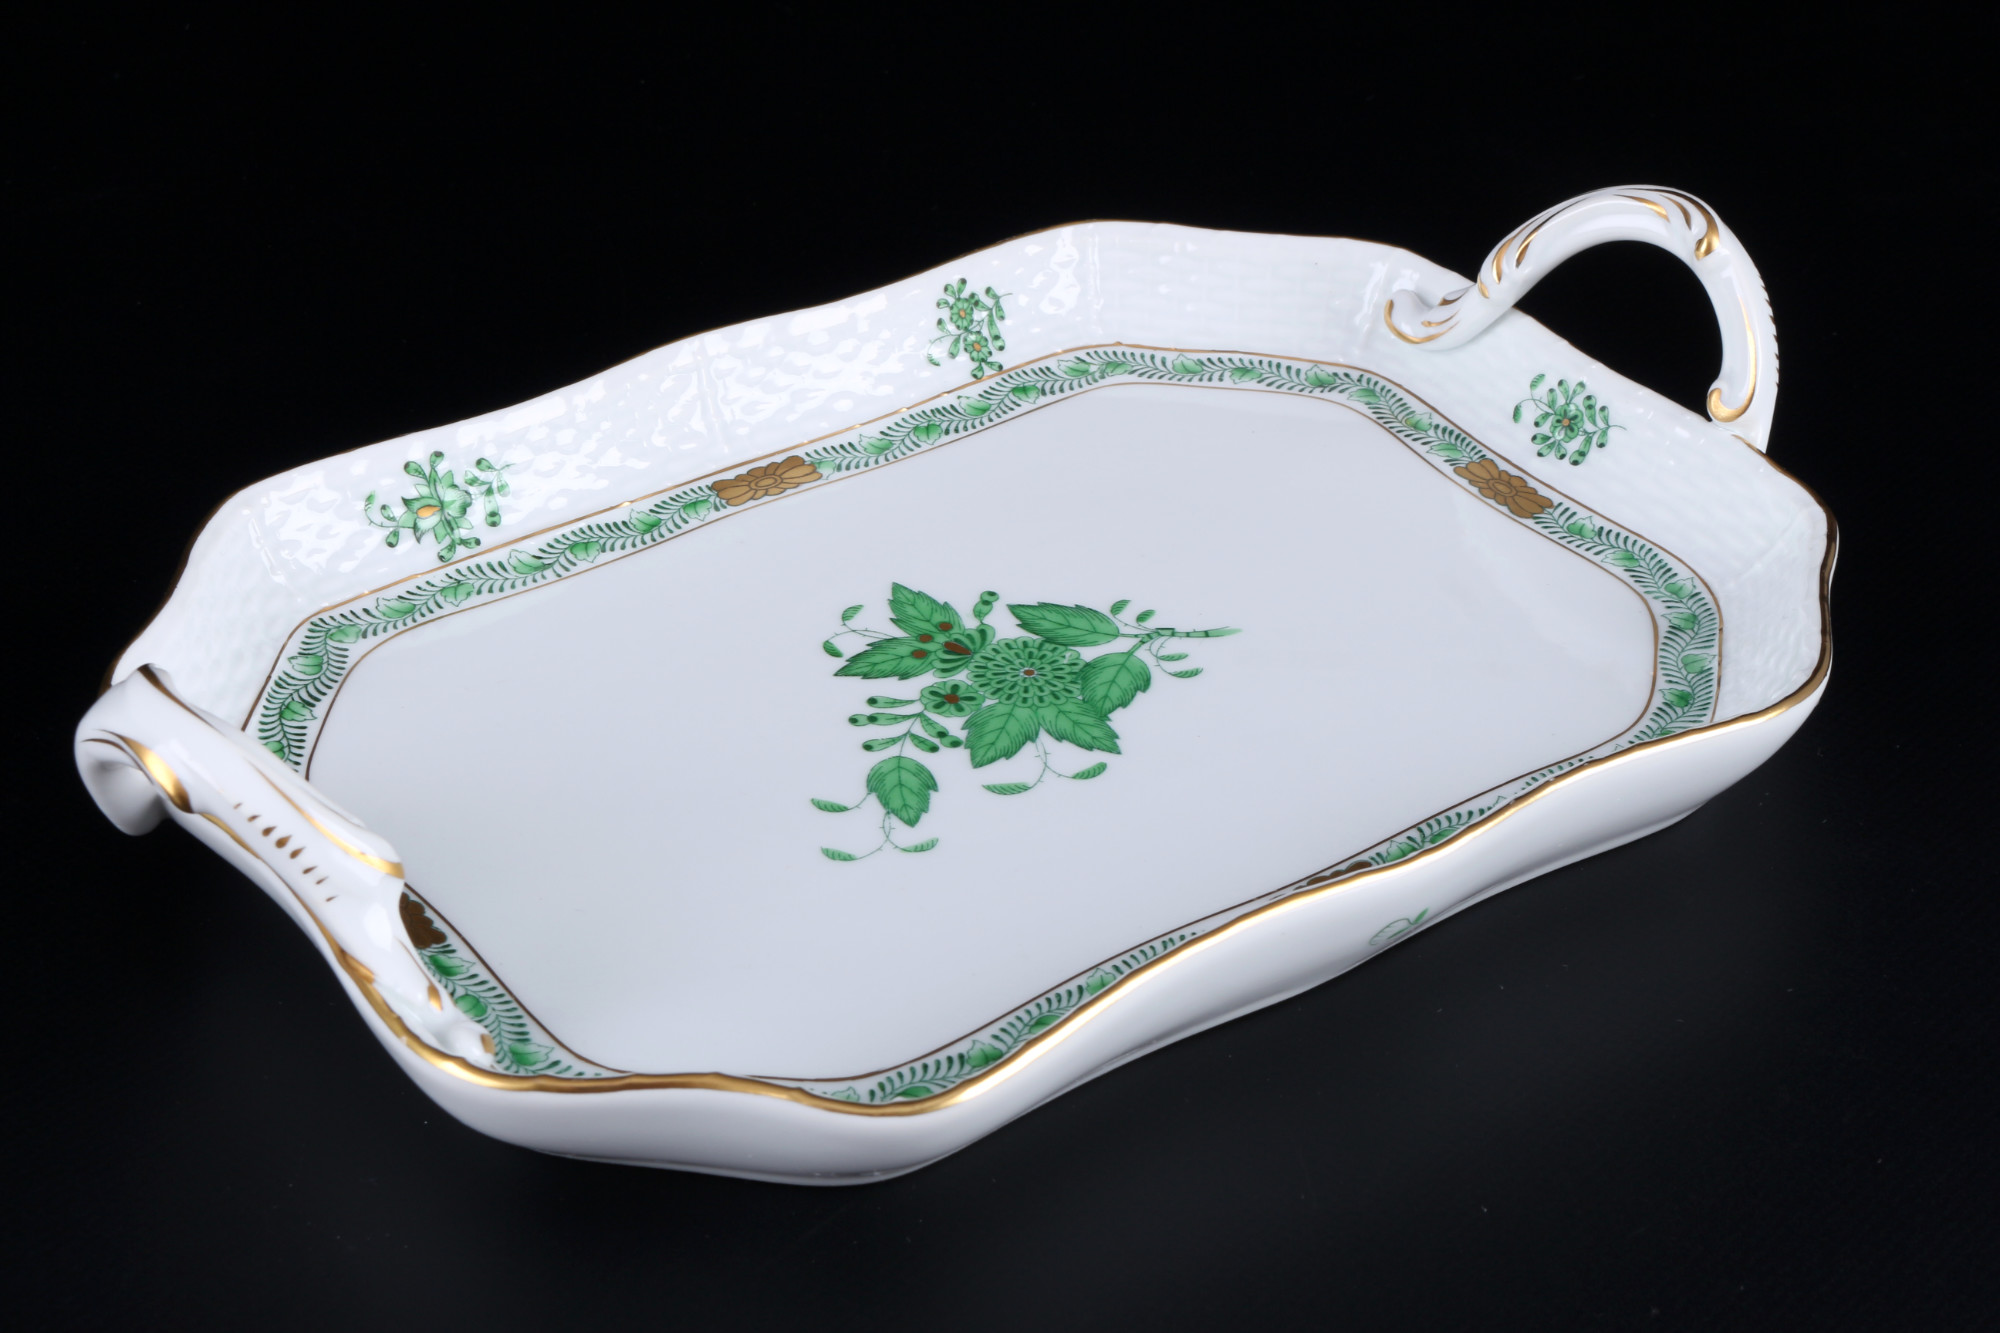 Herend Apponyi Vert coffee service for 6 persons, Kaffeeservice für 6 Personen, - Image 6 of 8